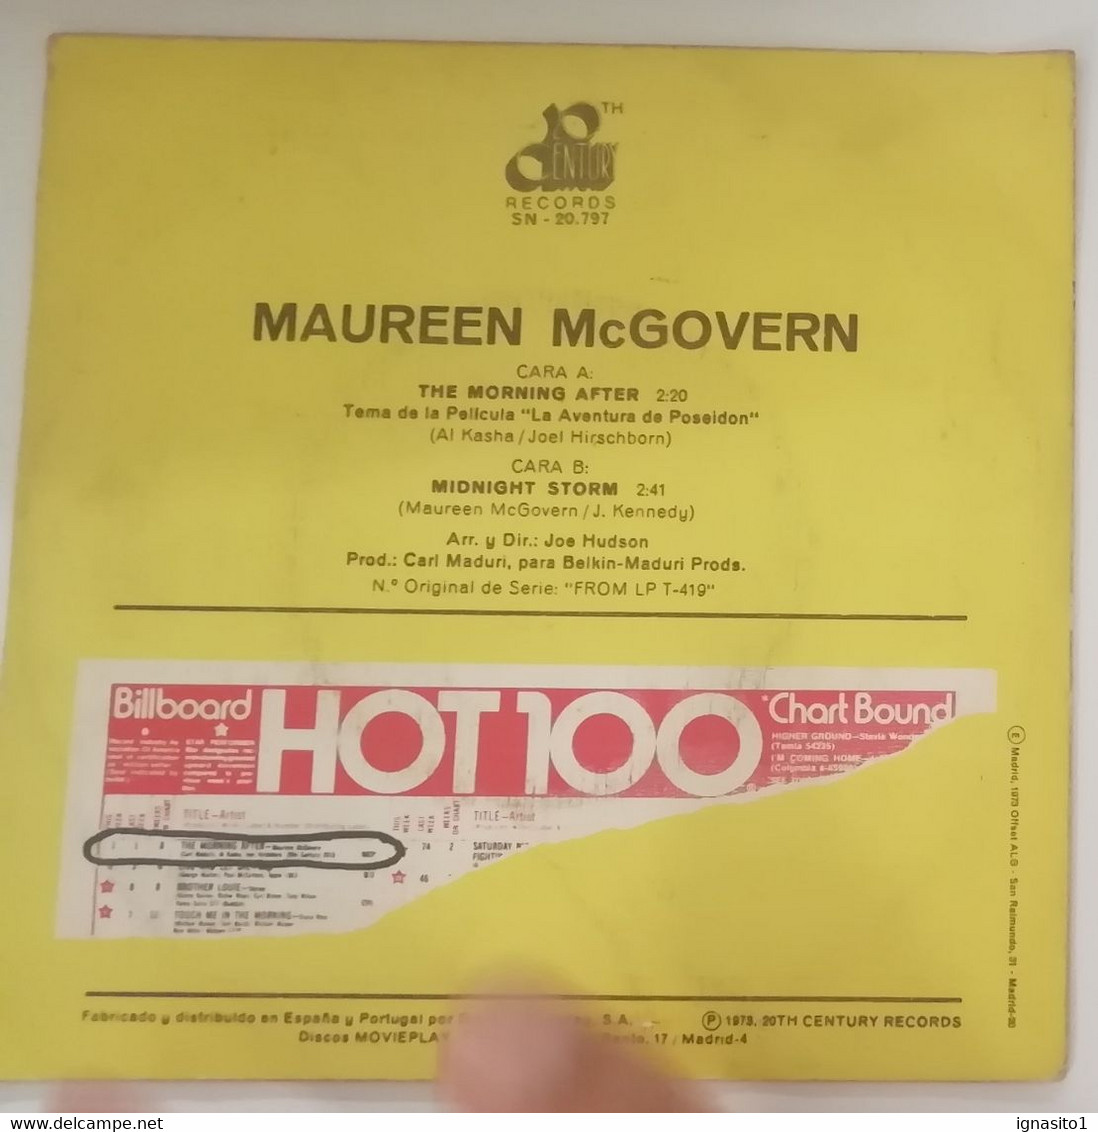 Maureen McGovern - The Morning After / Midnight Storm - Año 1973 - Other - Spanish Music